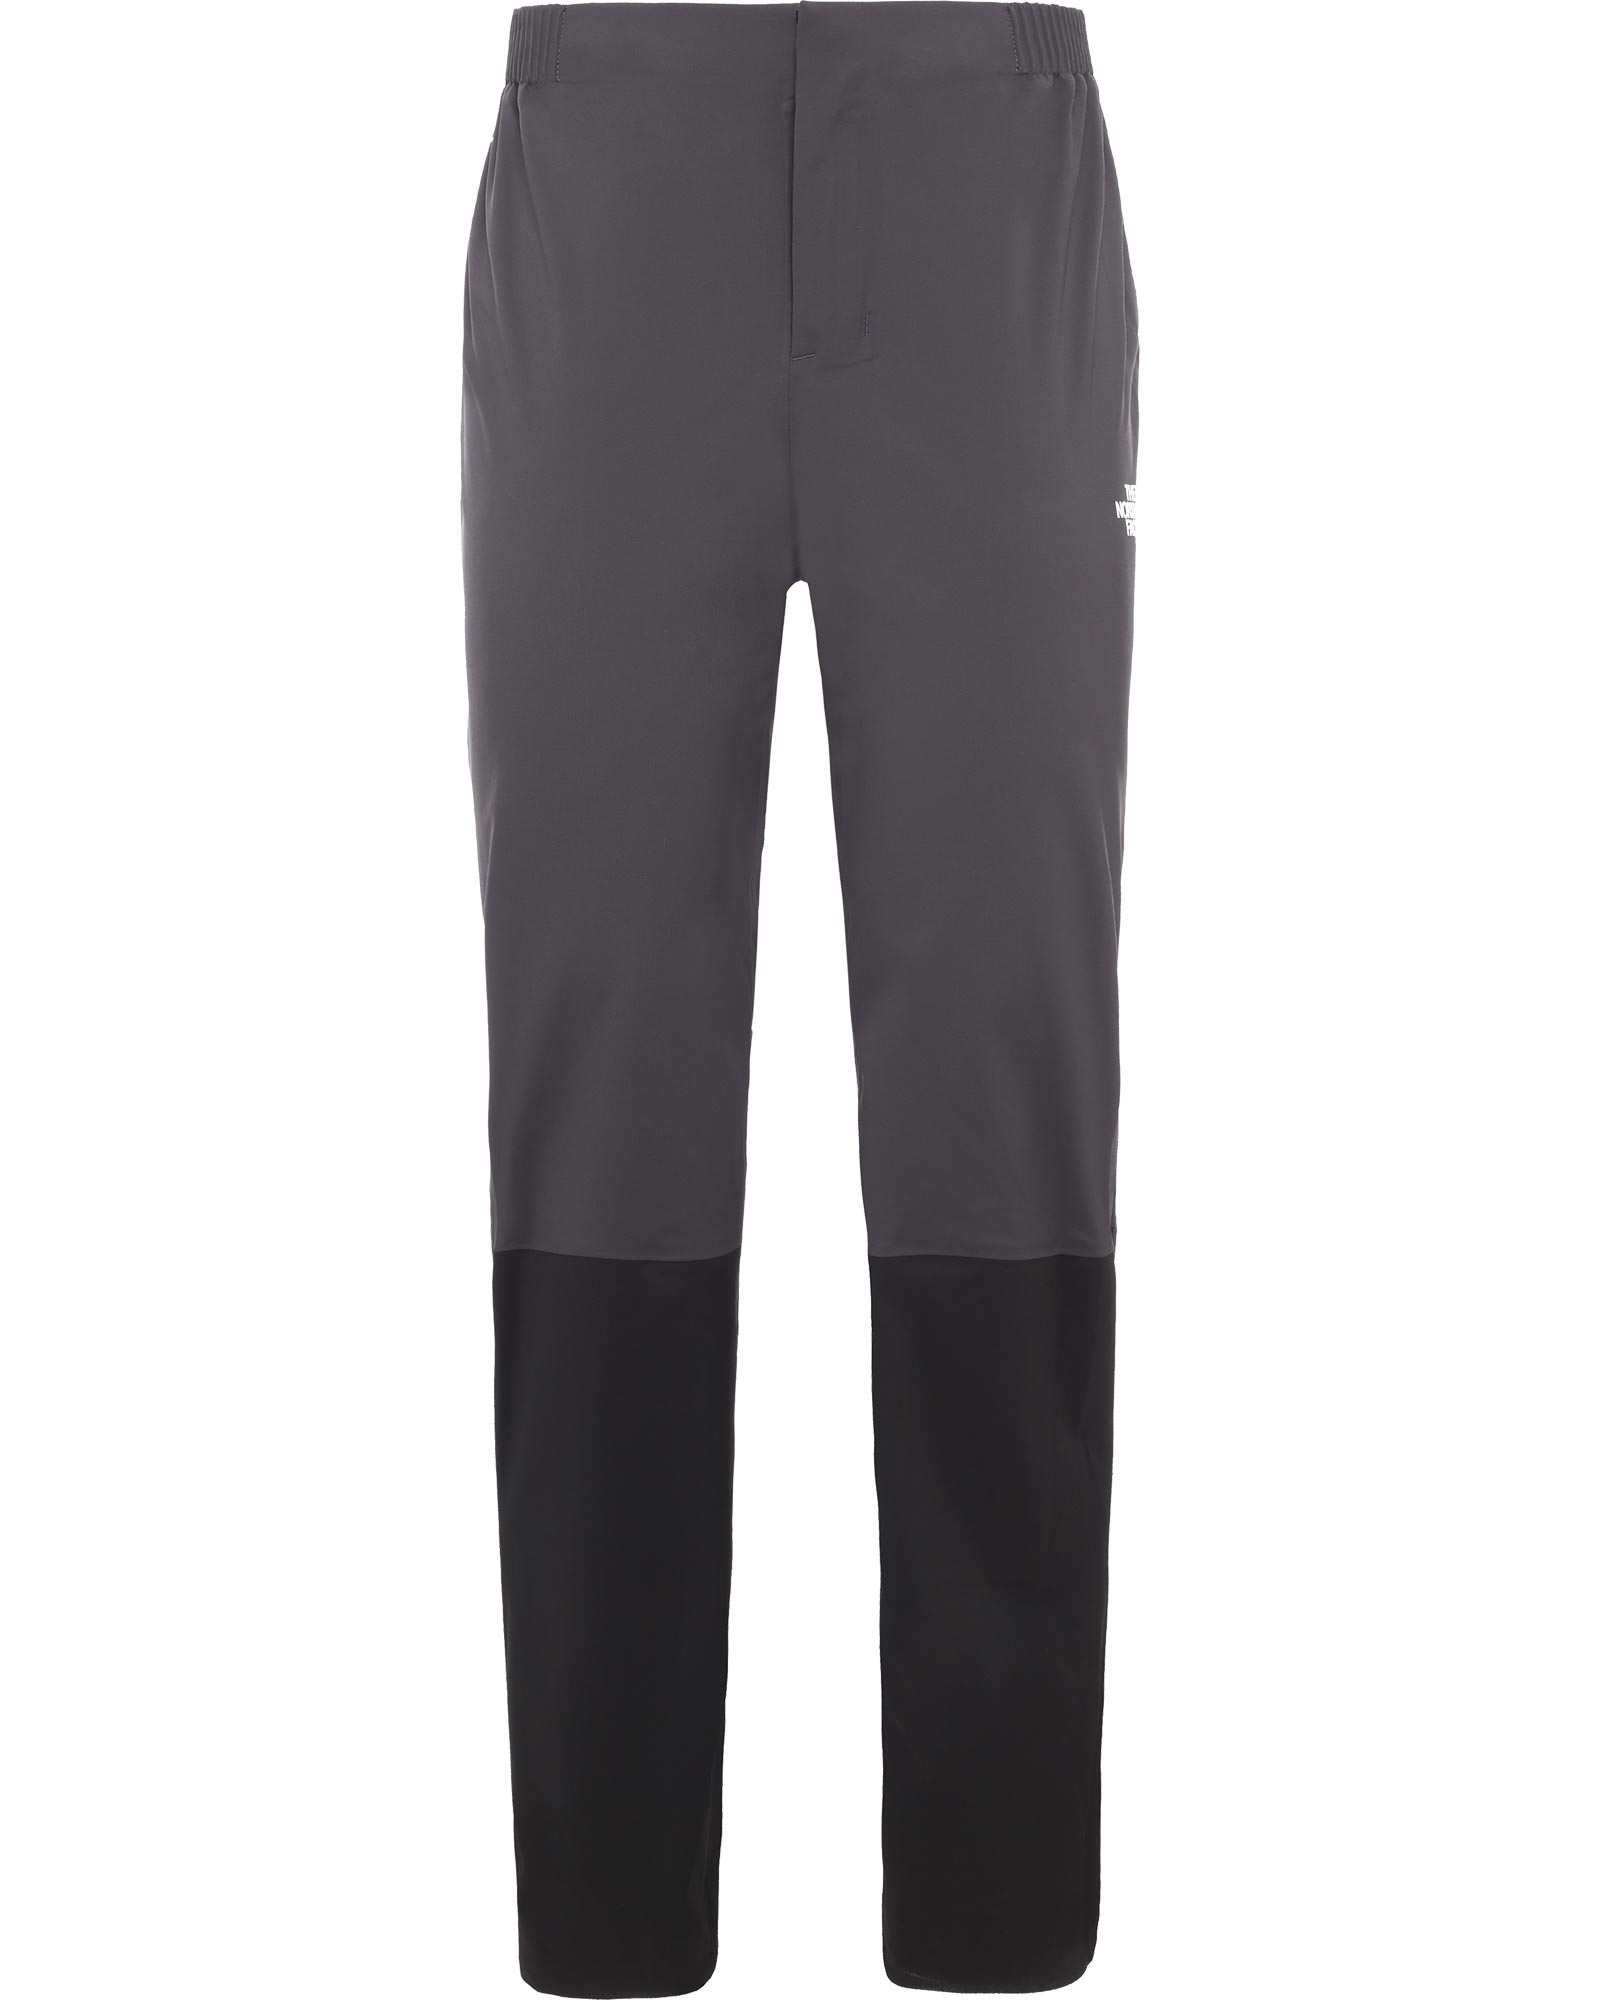 The North Face Impendor FUTURELIGHT Women’s Pants - Weathered Black L